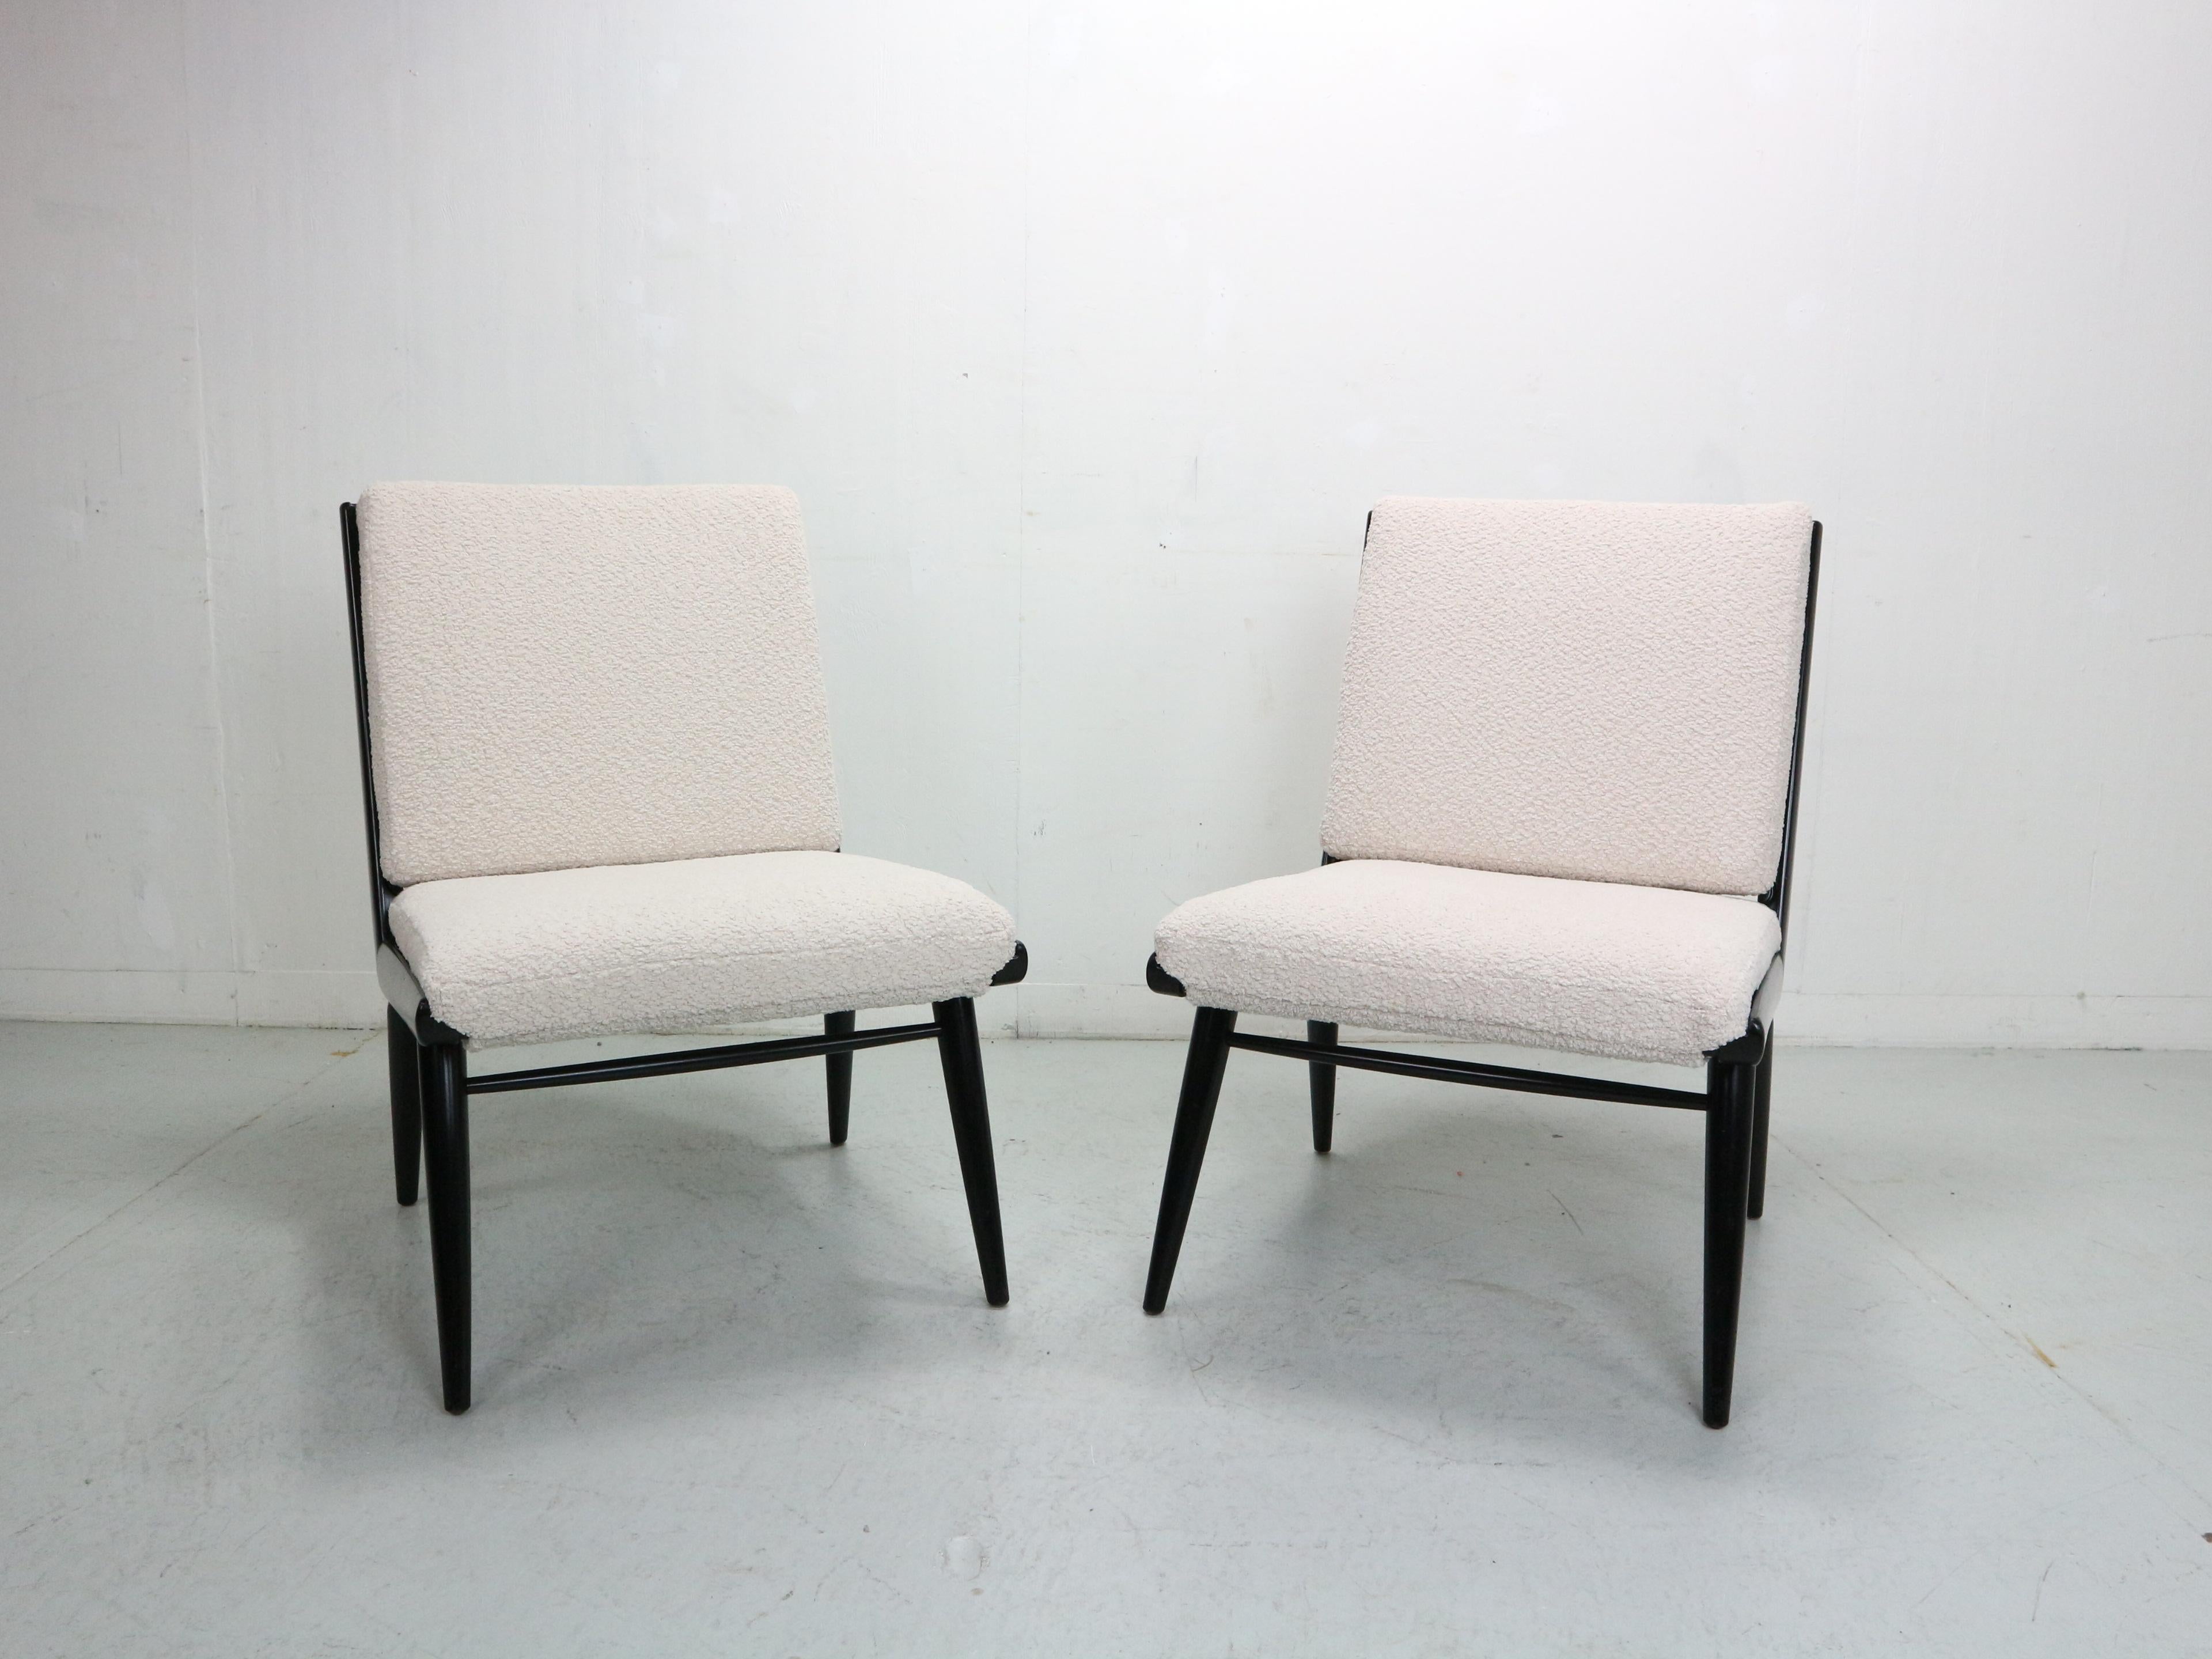 Hans Mitzlaff for Eugen Schmidt Soloform, two armchairs / lounge chairs, 'Boomerang' model, wood, fabric, designed in 1953, Germany. A pair of wooden armchairs with black lacquered frame. Off-white / creme bouclé  felt pads fastened with snaps,